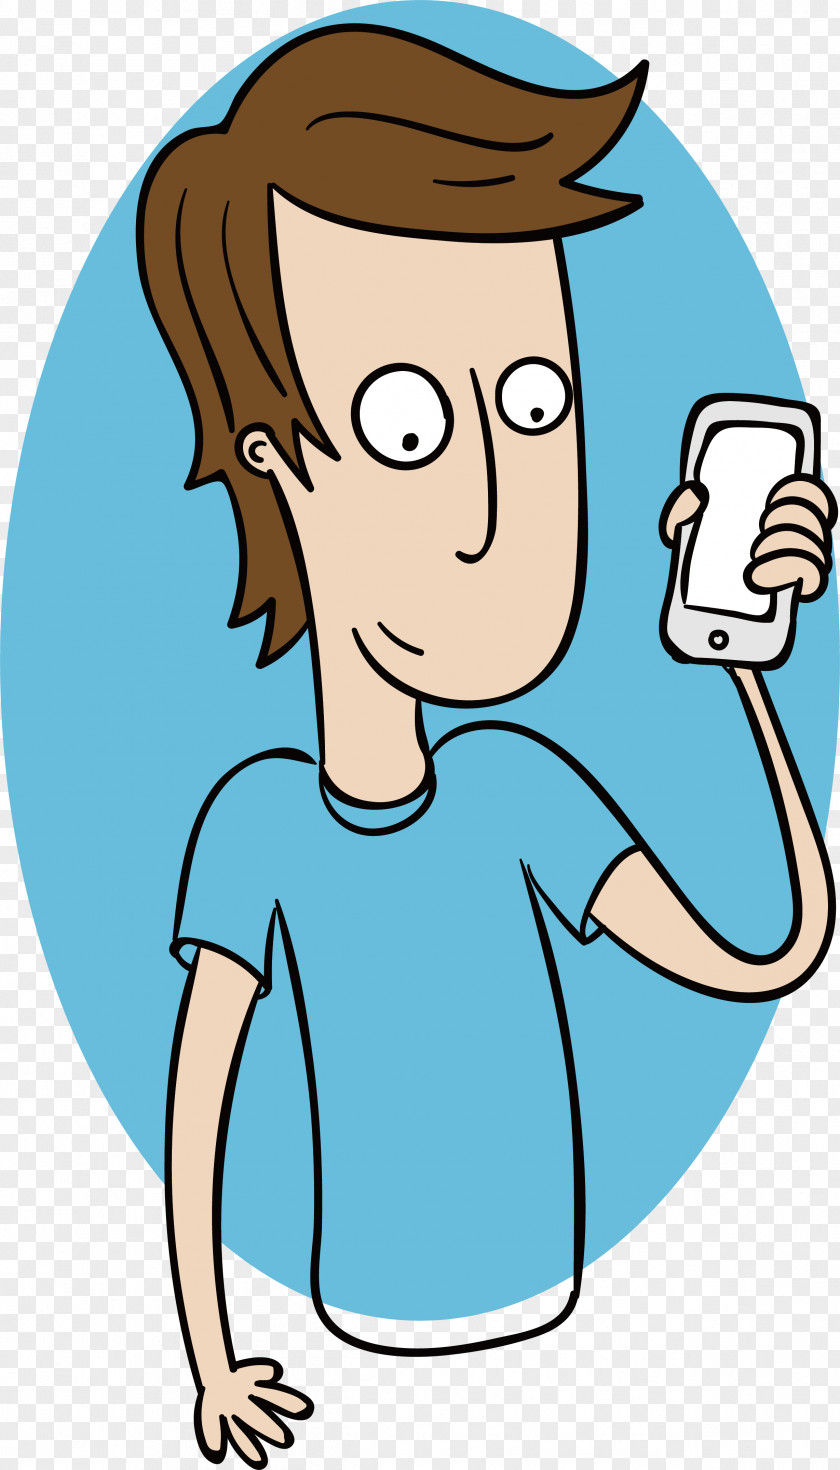 The Man On Phone Mobile Telephone Euclidean Vector PNG